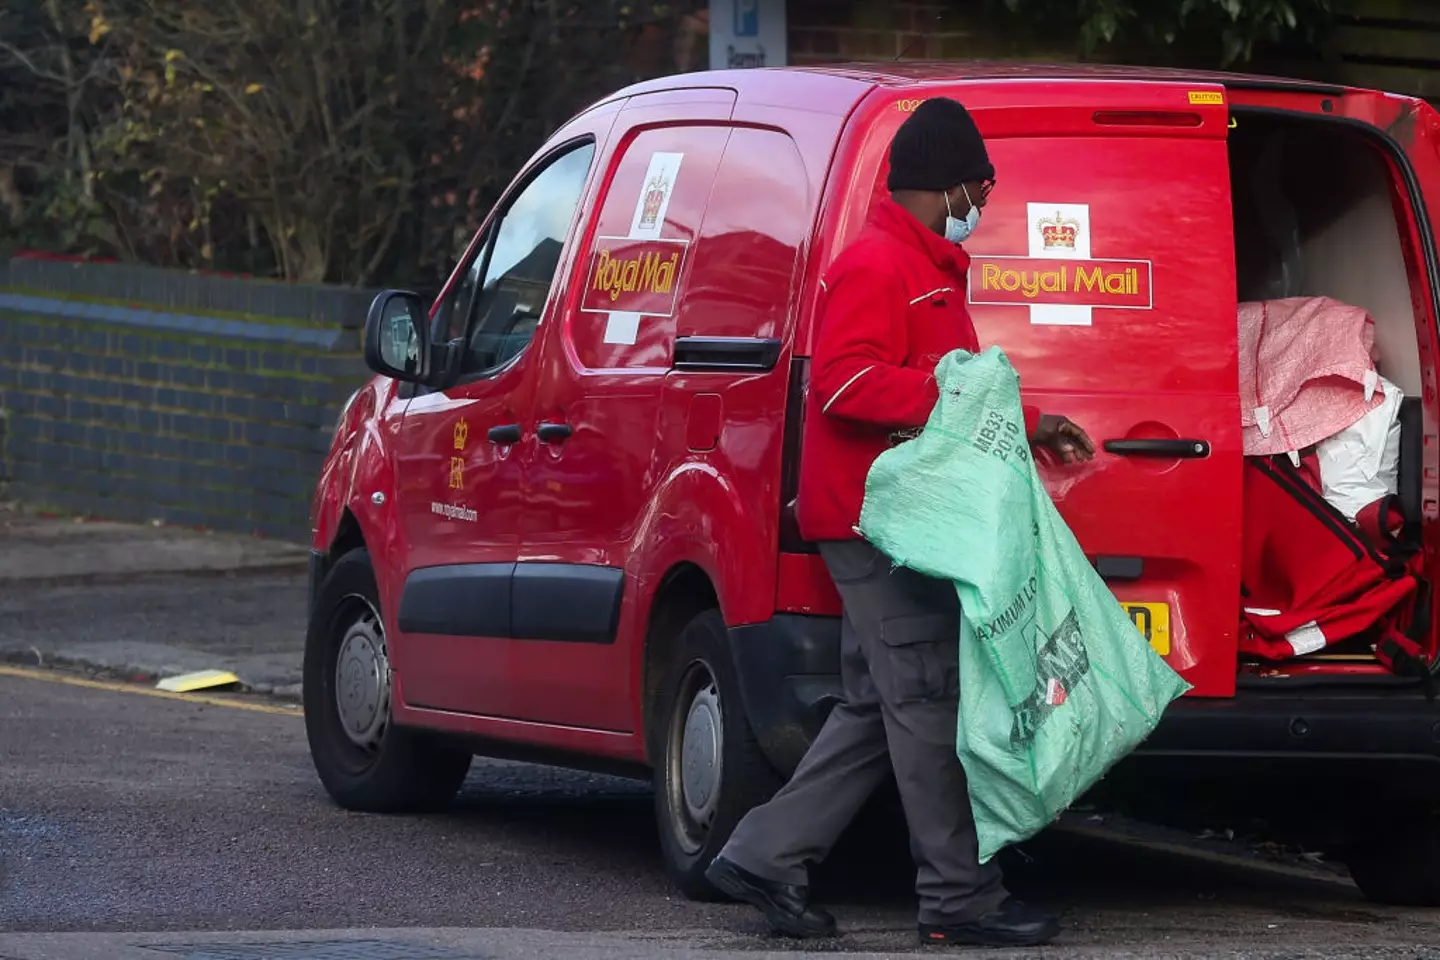 Royal Mail warned people parcels and post needs to be sent out by 20 December.